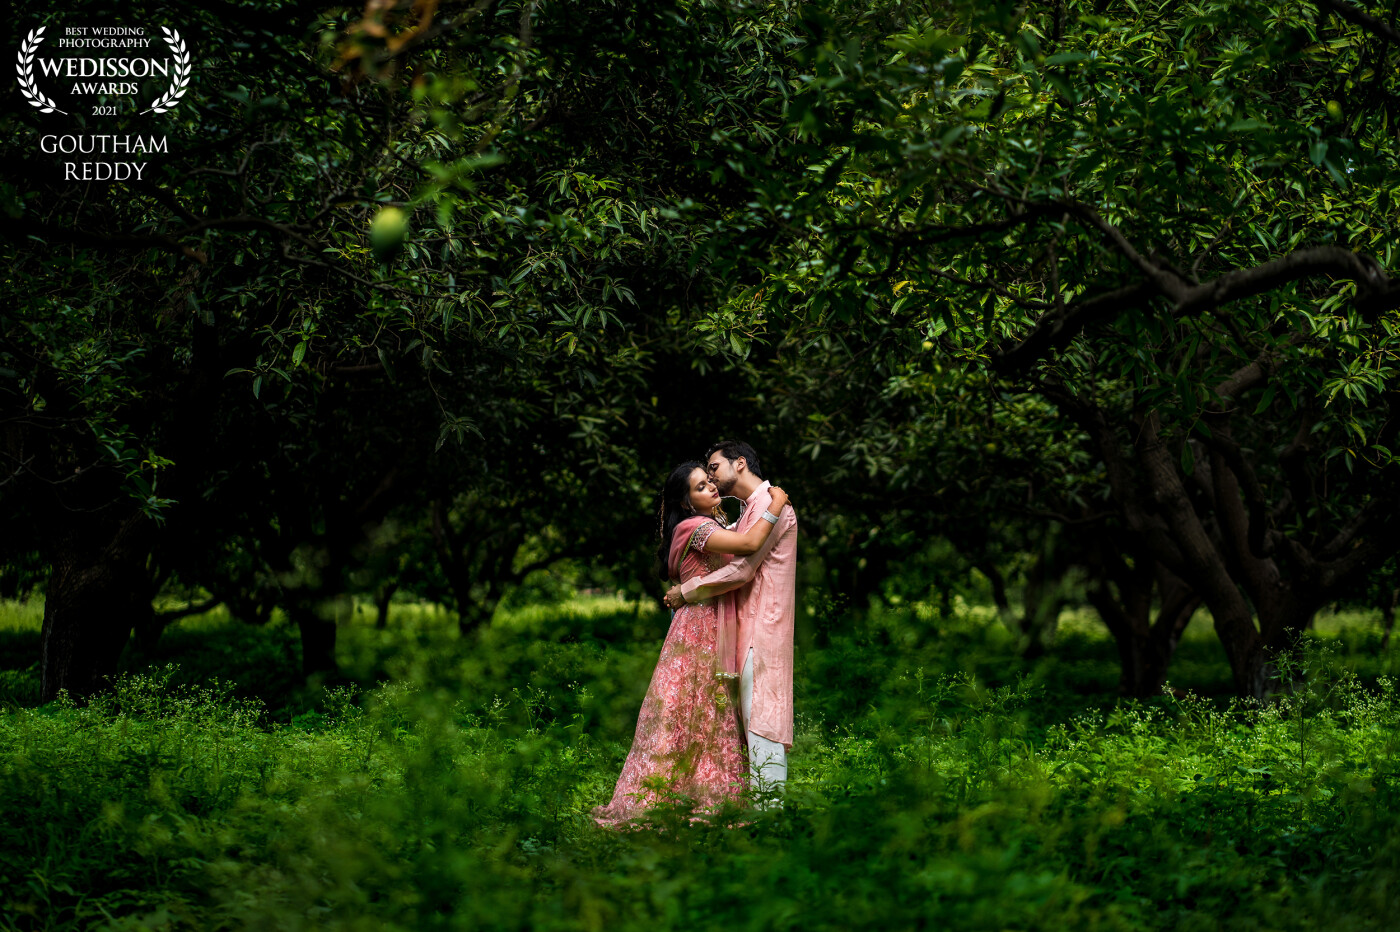 As much as I love shooting with artificial lights..it’s sometimes so refreshing to embrace the beauty of natural light. Amidst all the greens wanted to capture the essence of romance and added to it was some beautiful sunlight making the image look surreal!